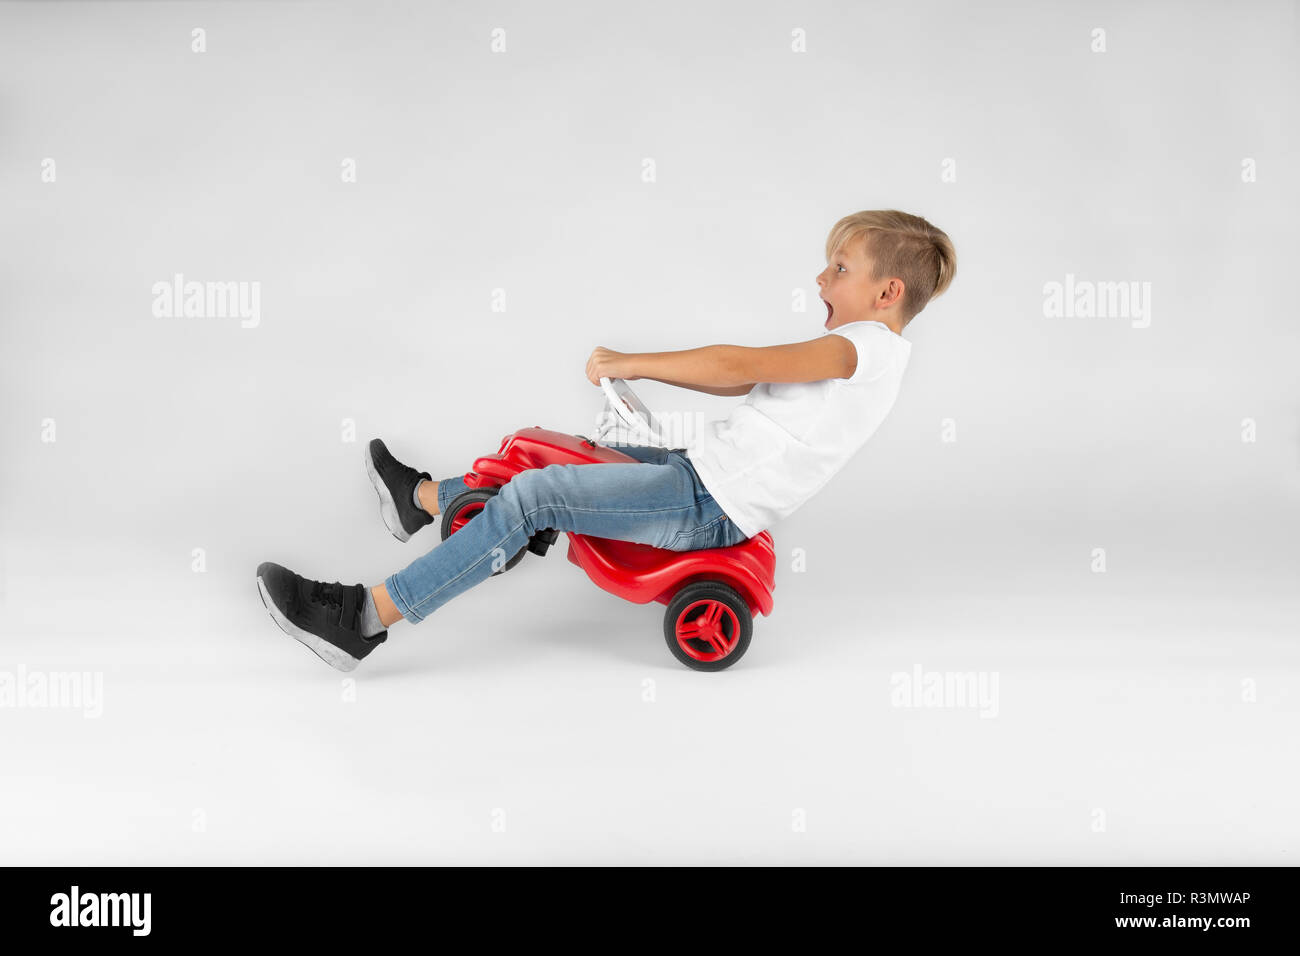 little blond boy is riding a toy vehicle very fast and is screaming Stock Photo